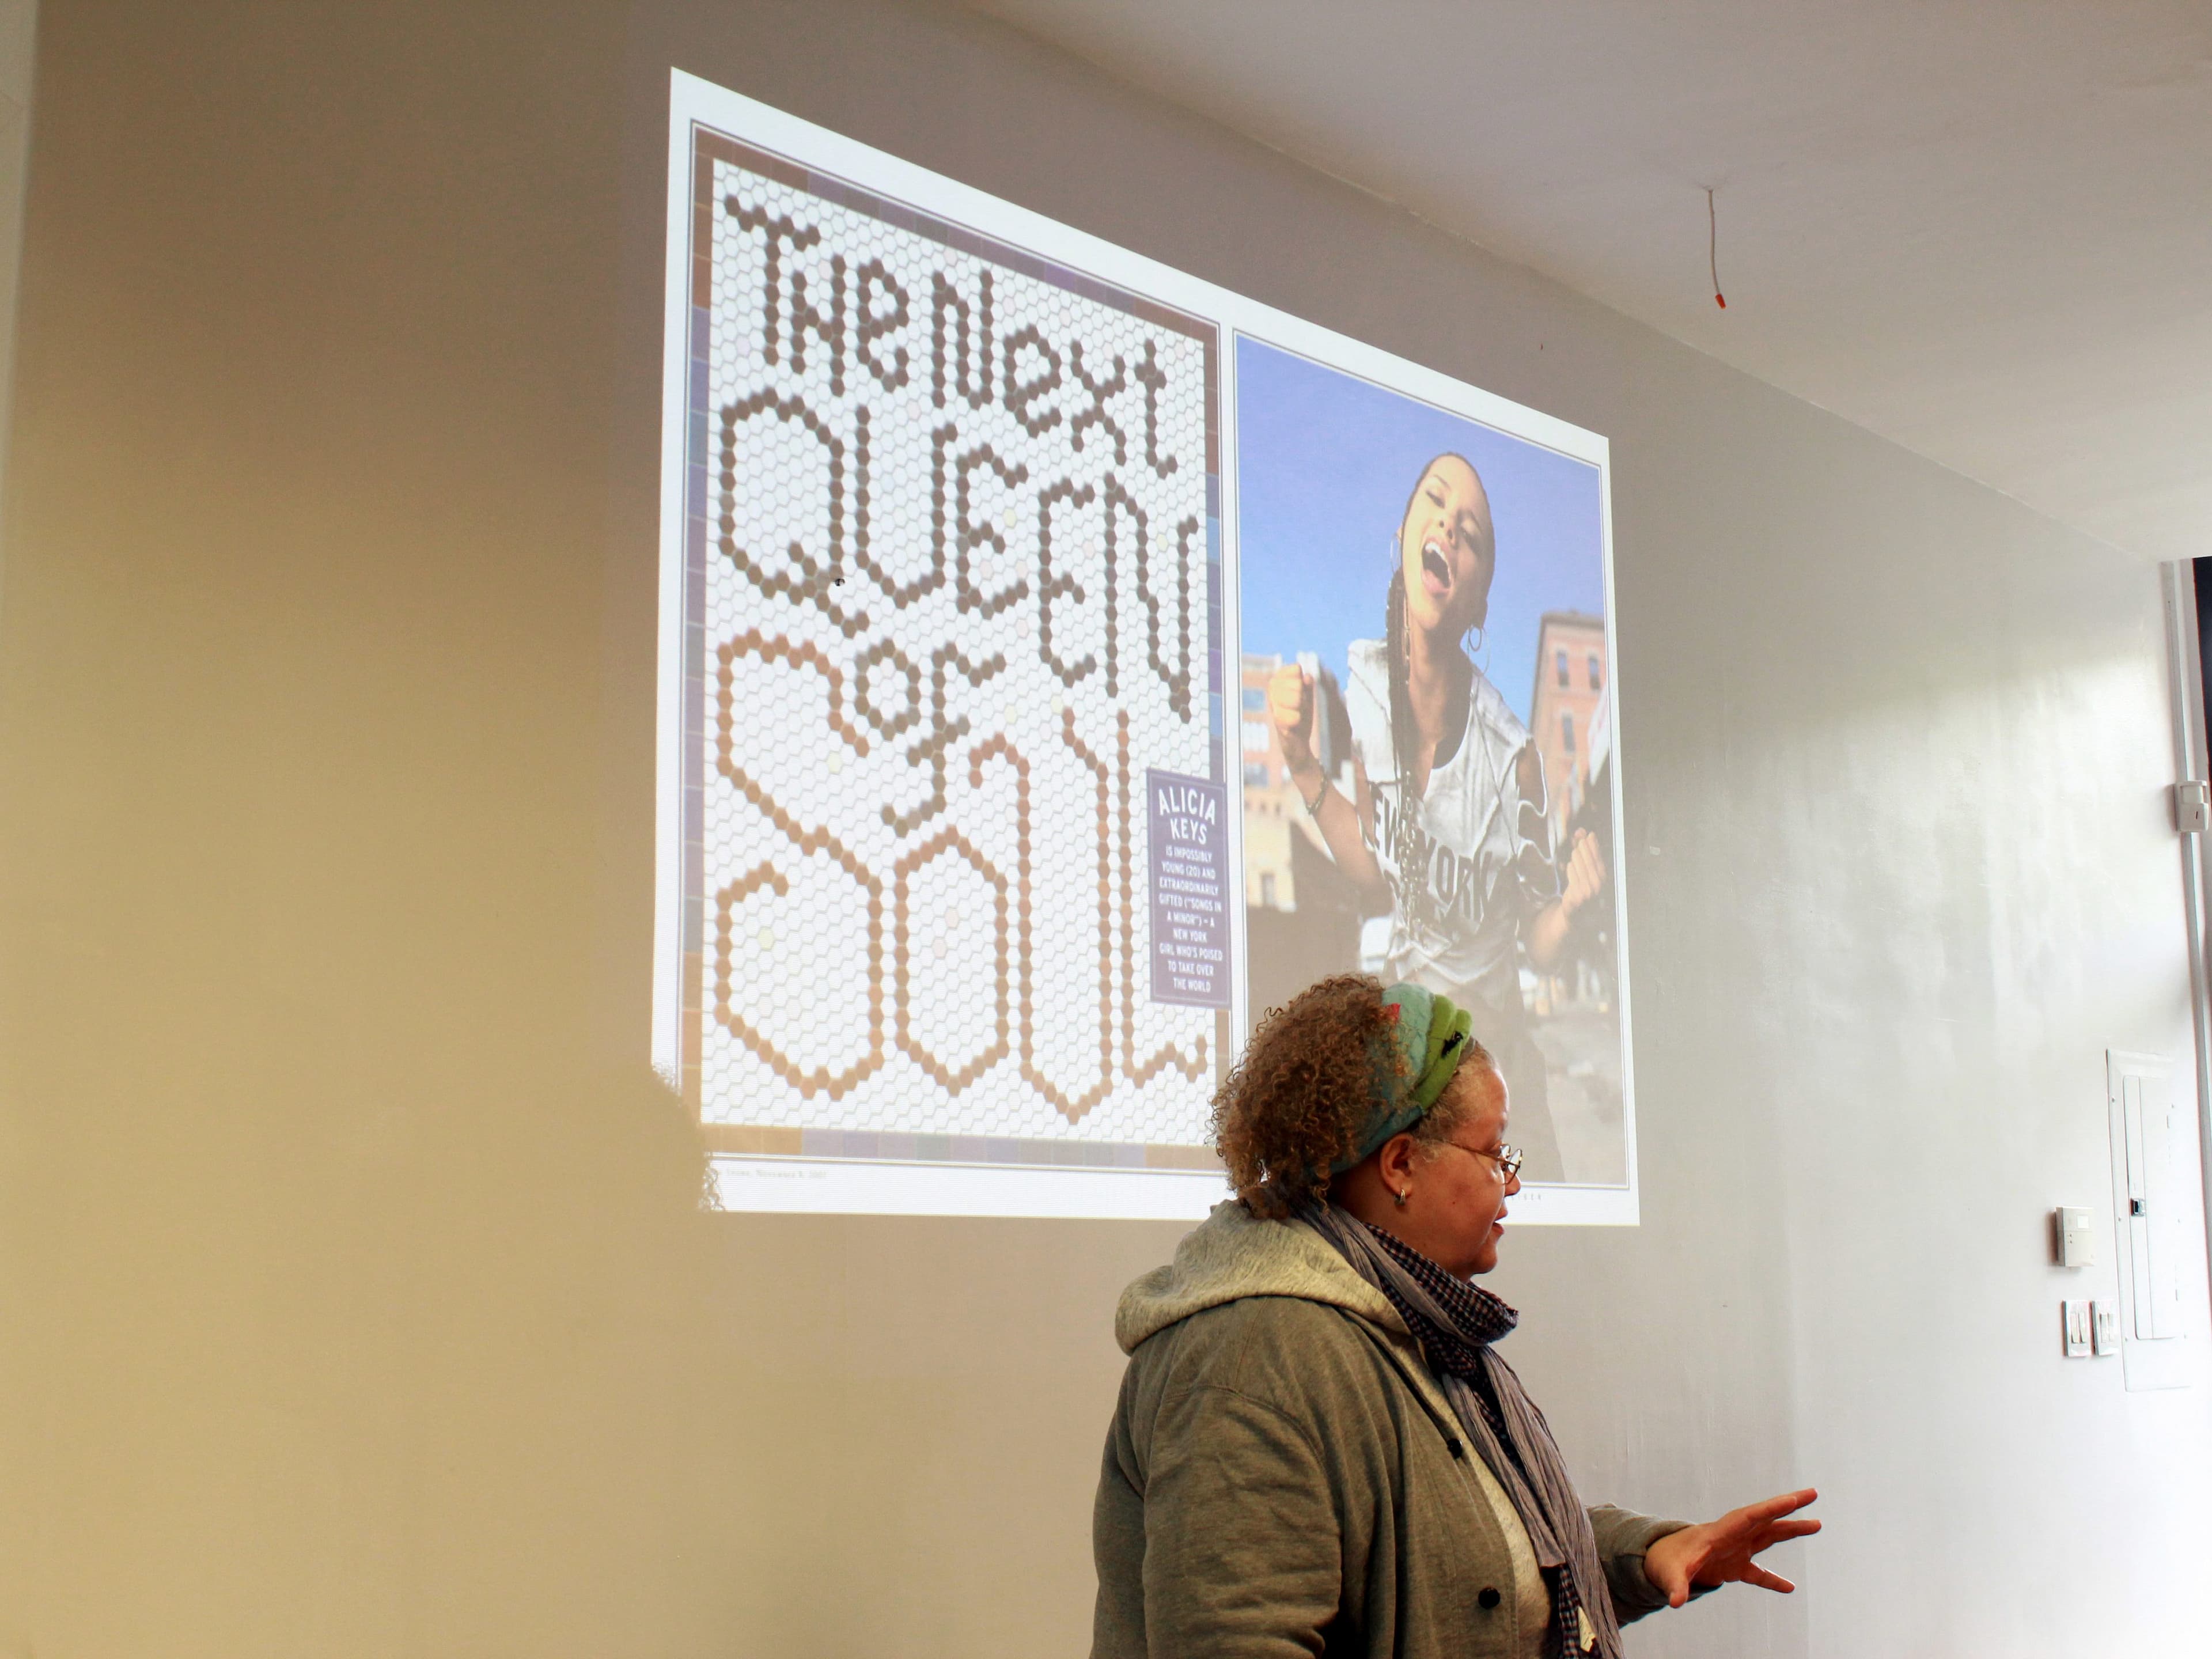 A person stands in front of a projected presentation in a bright room. The slide displays the text "The Next Queen of Soul" in a creative font, alongside an image of a woman singing passionately. The presenter is gesturing while speaking.